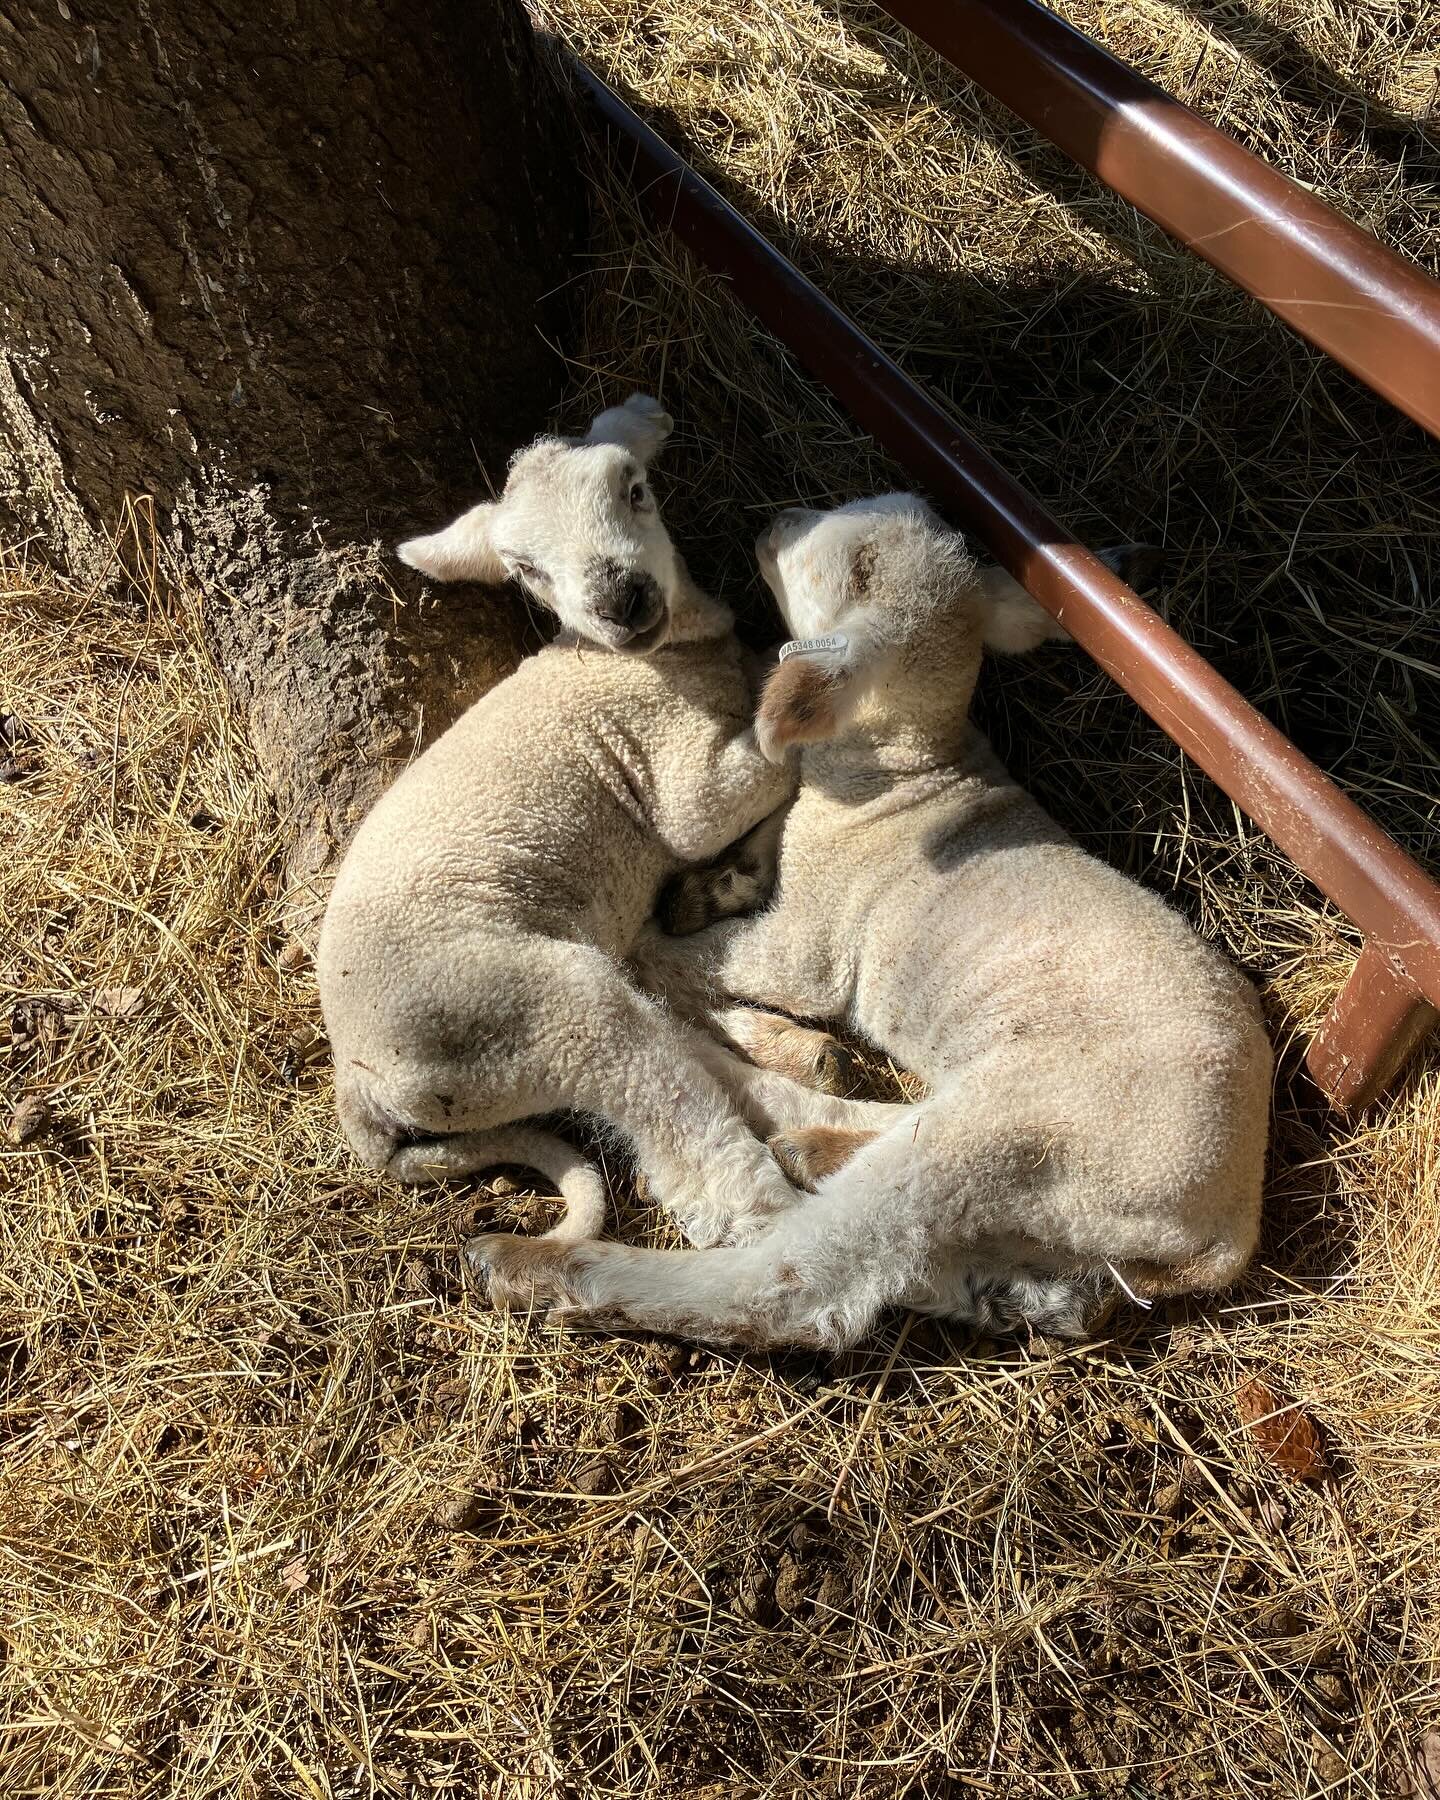 Happy Equinox! Almost heart shaped, some of our new spring lambs have arrived.